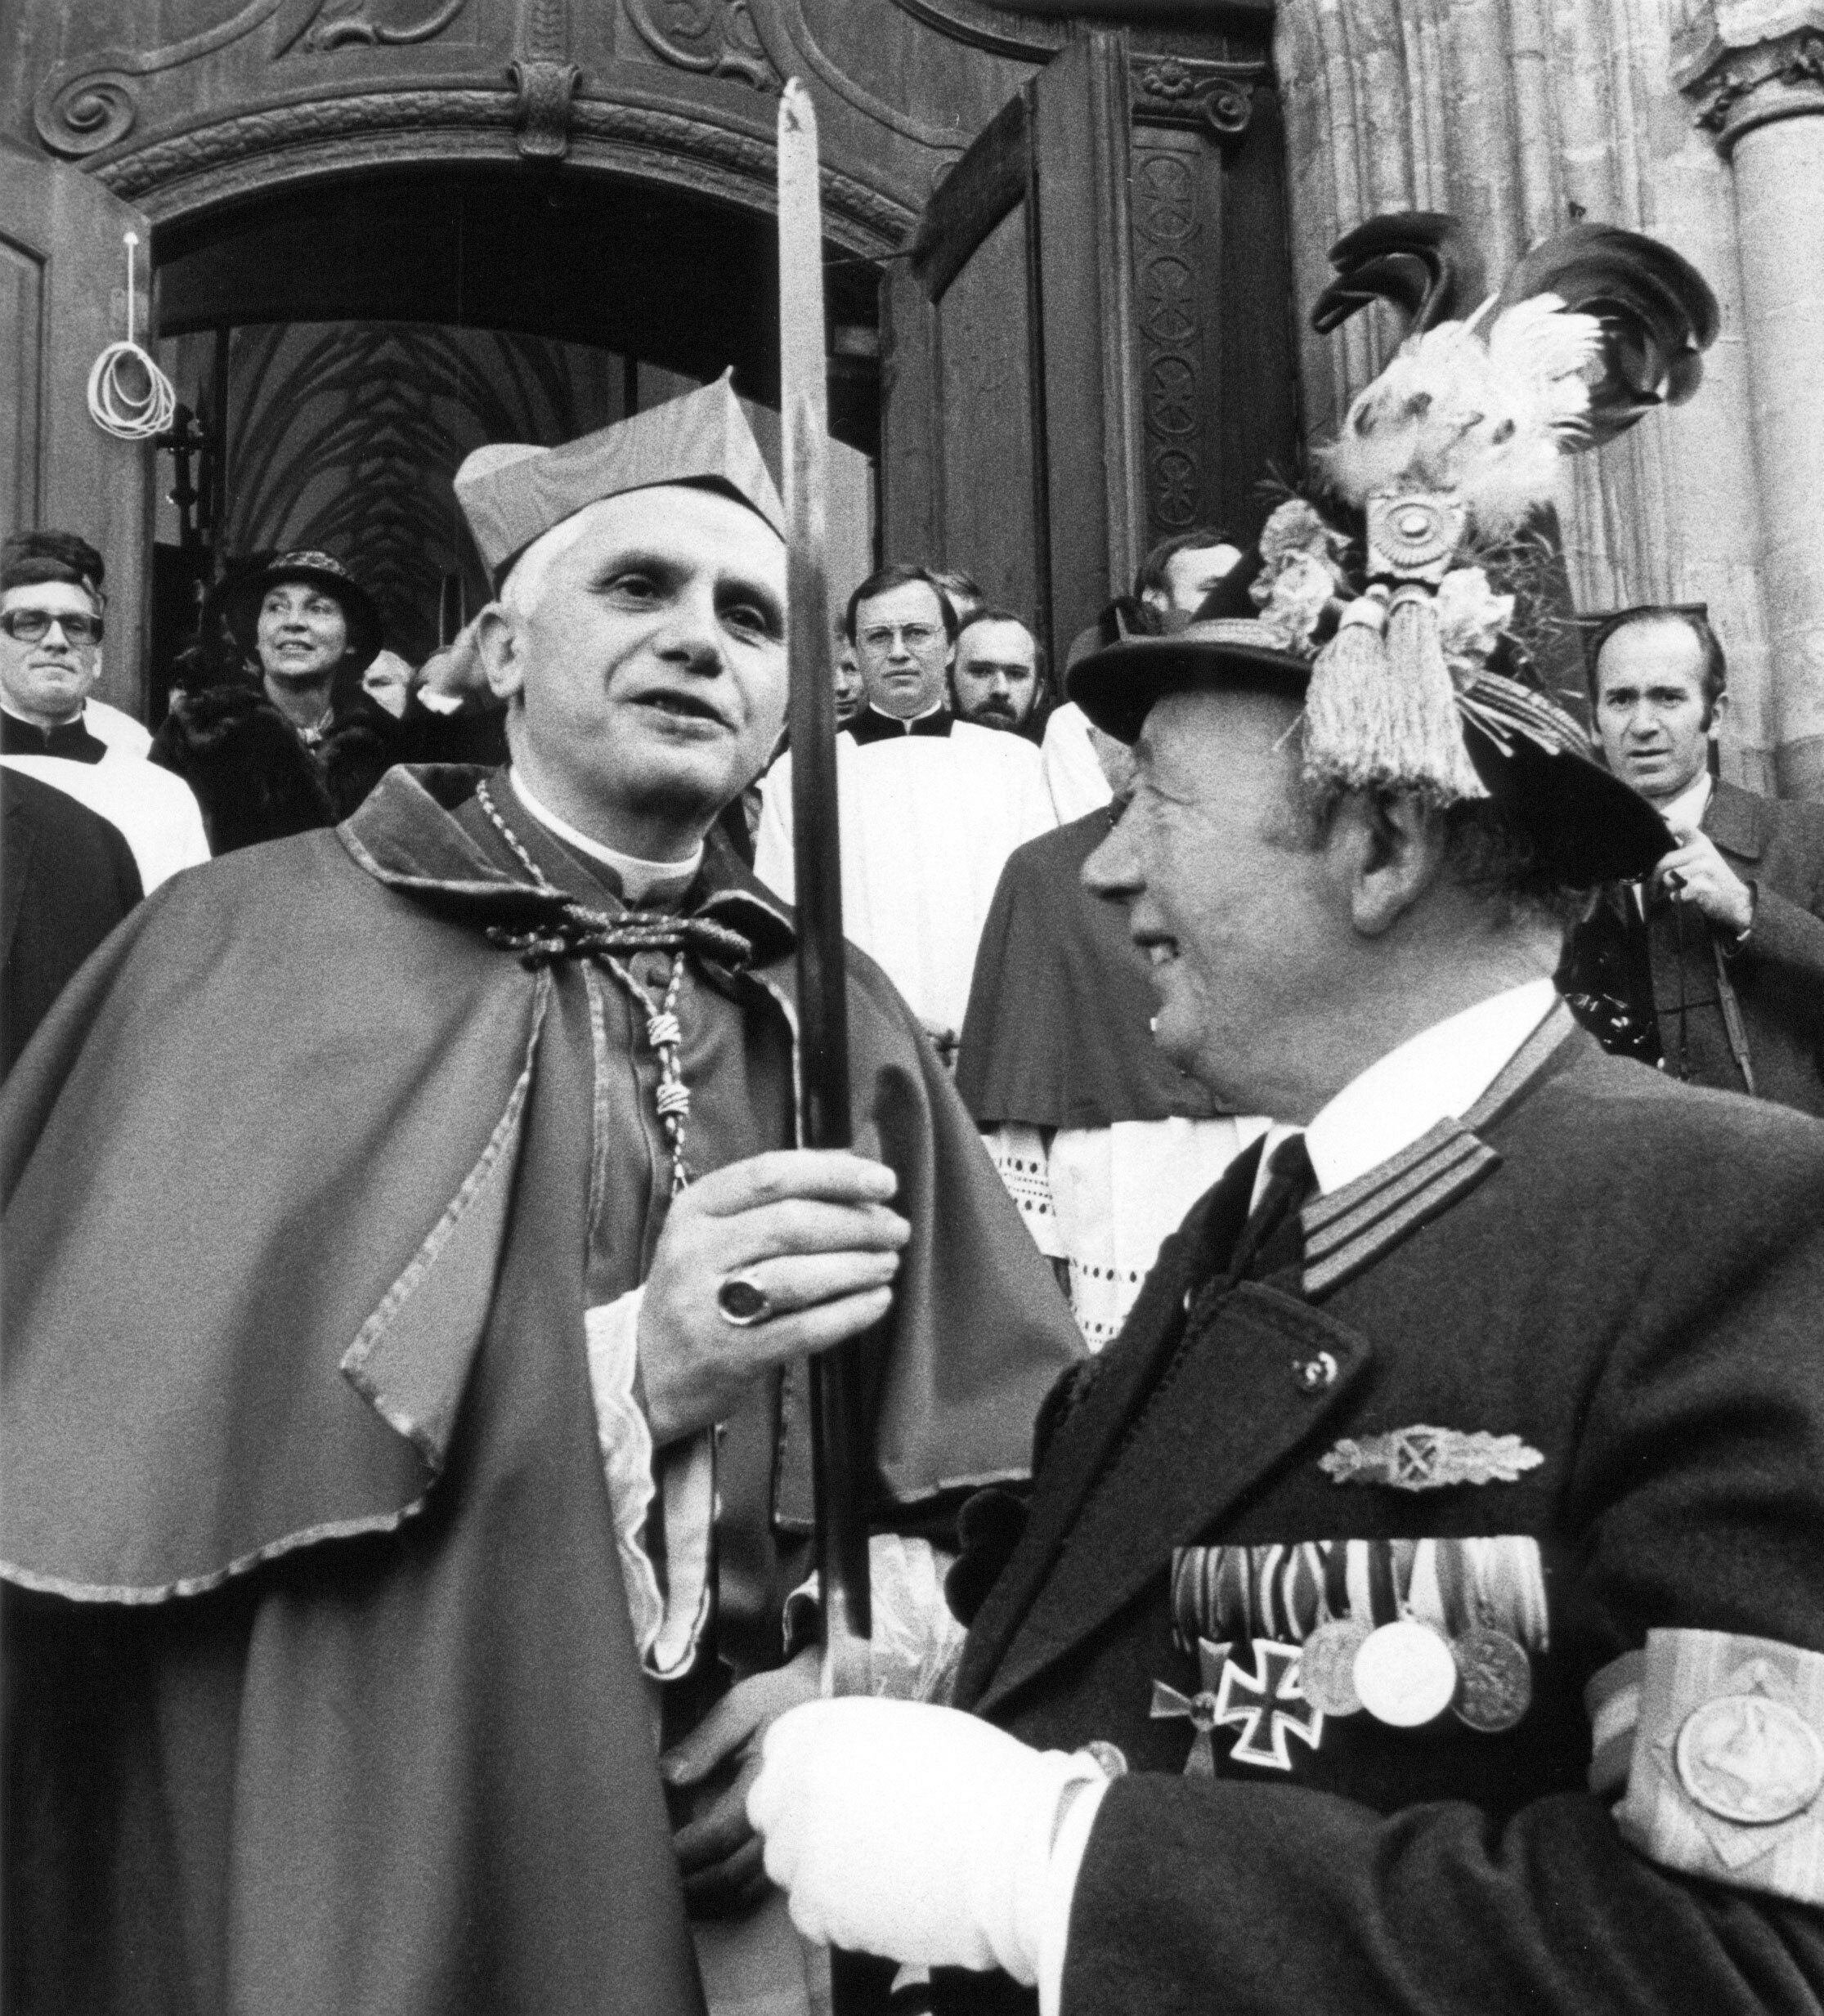 Photo from February 28, 1982, showing Cardinal Joseph Ratzinger at a public event.  AP